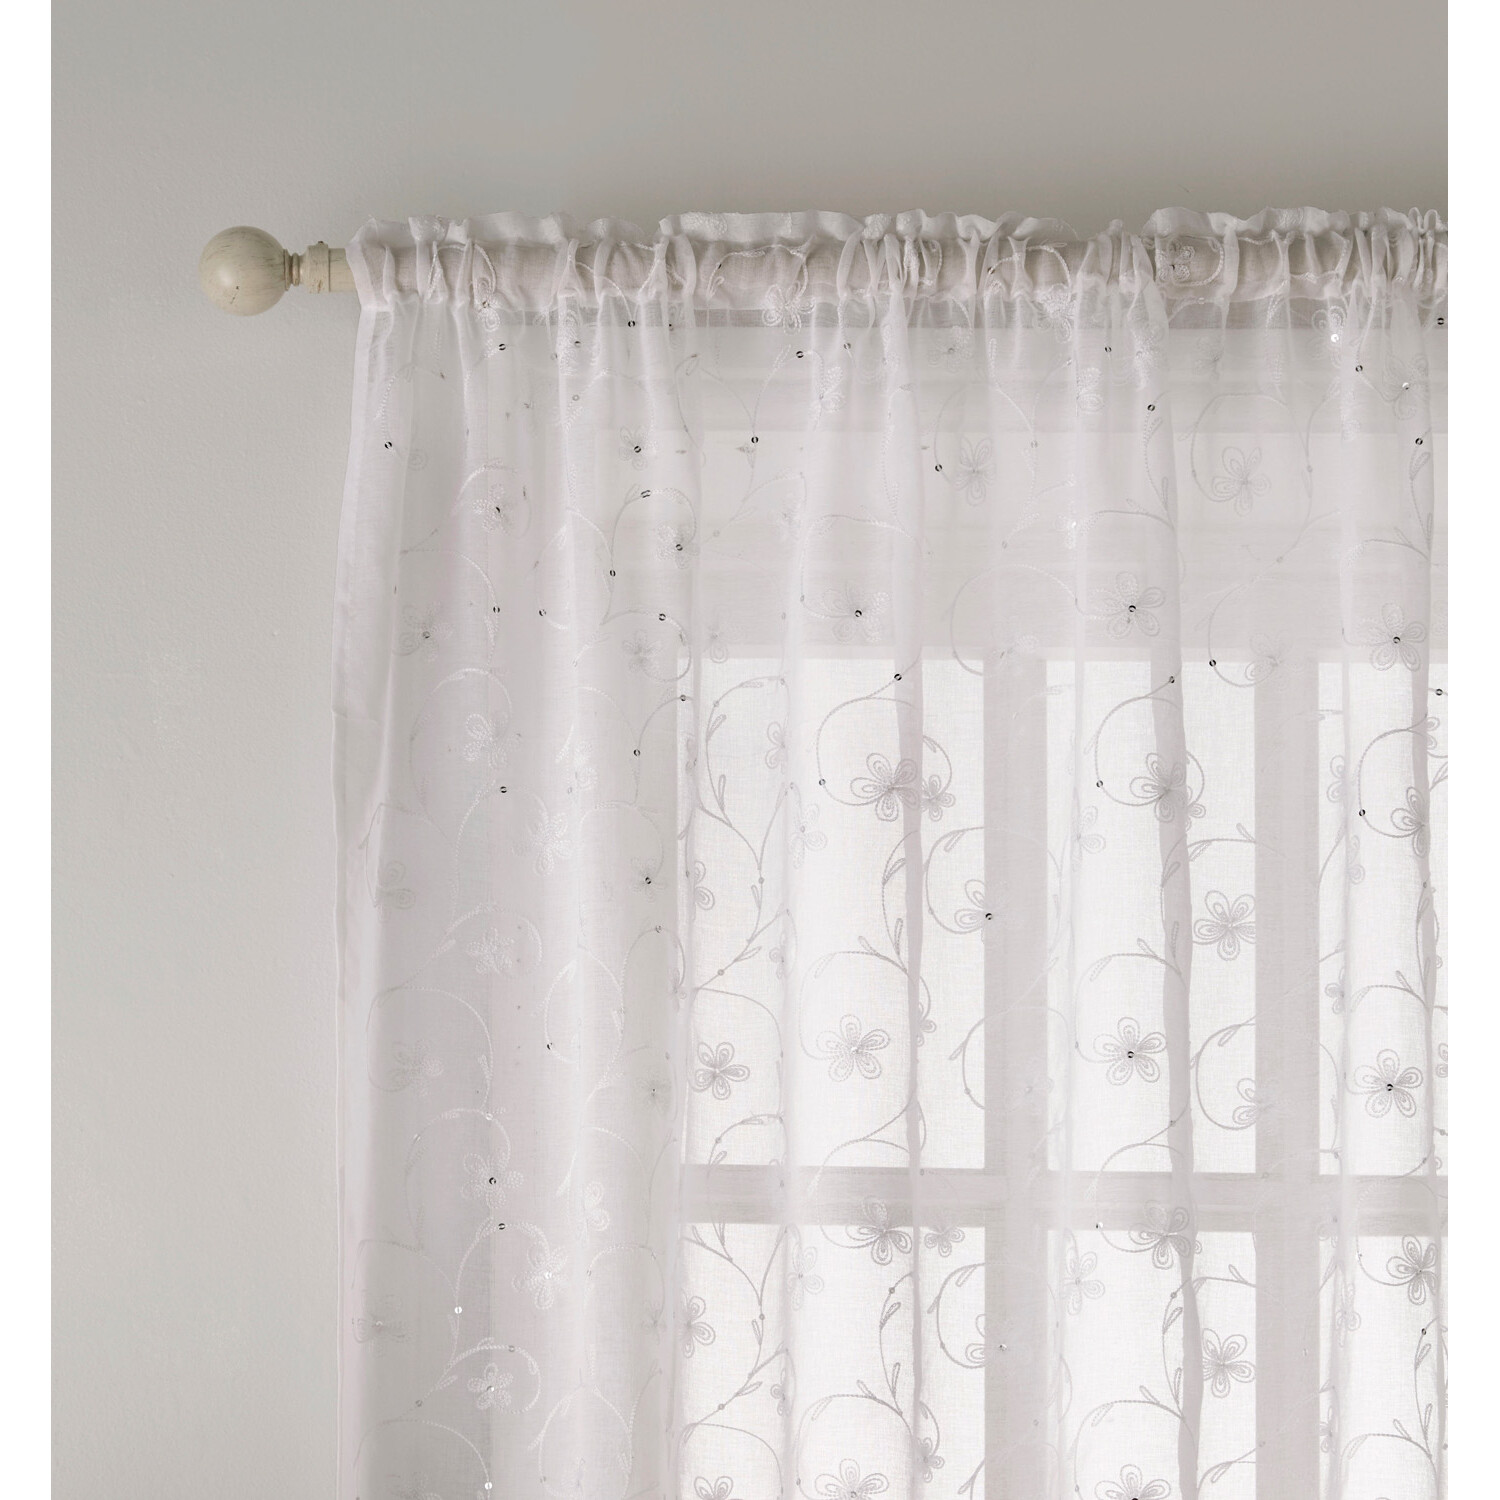 Belle White Embroidered Voile Curtain 122 x 140cm Image 2